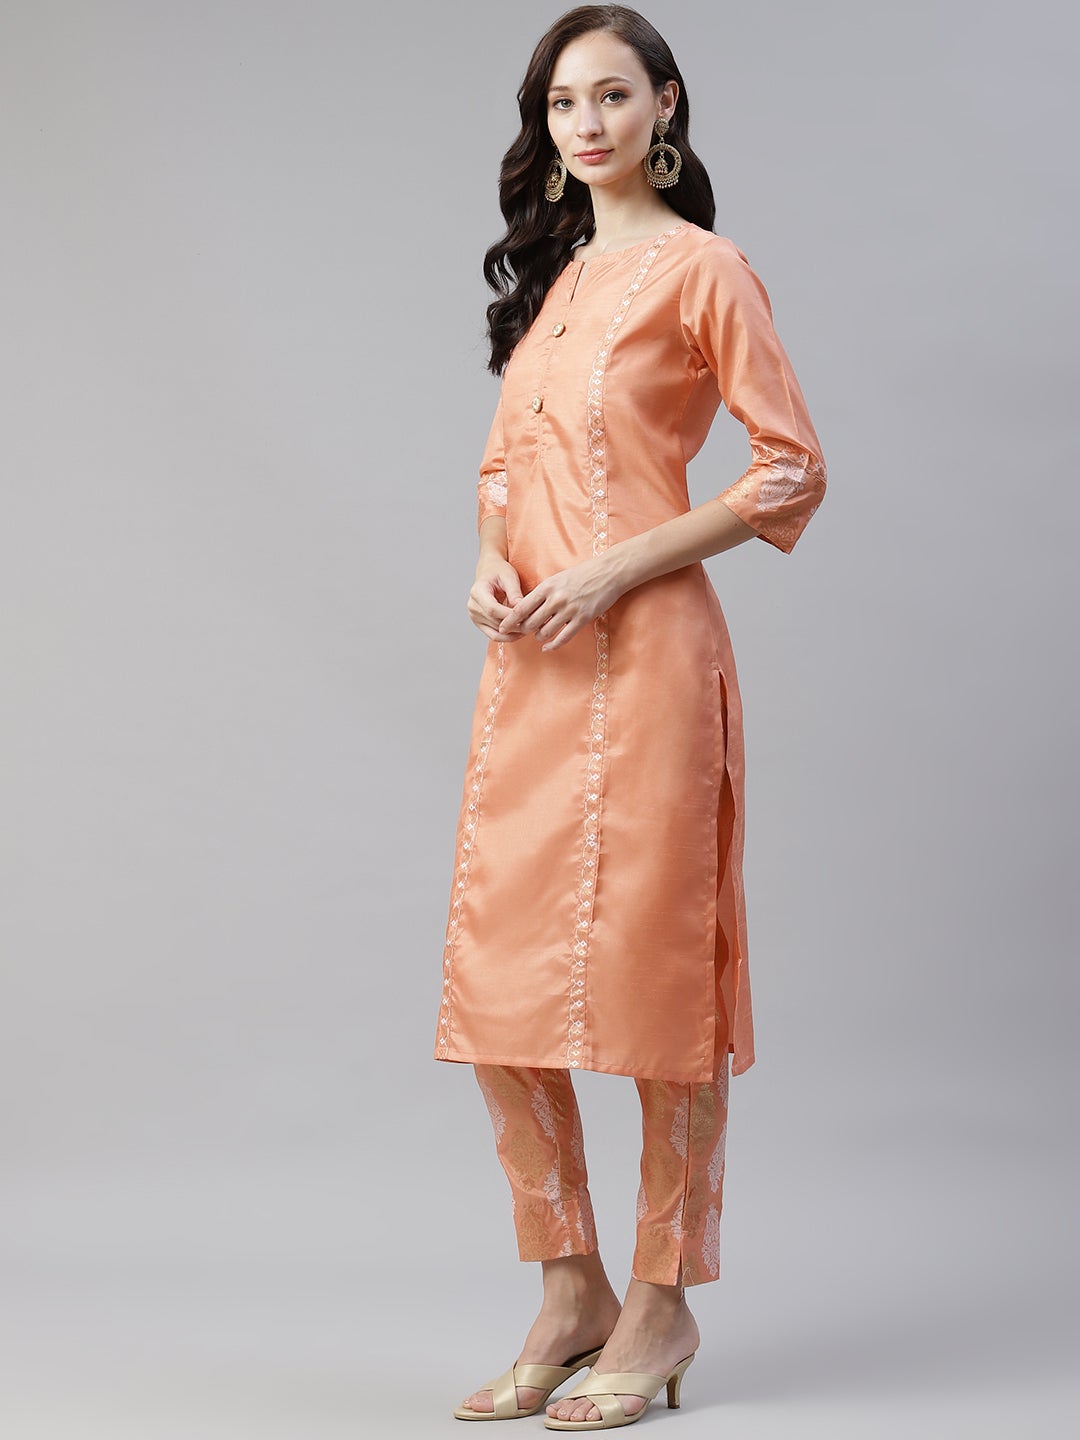 Mindhal Women's Peach Color Dyed Straight Kurta,Pant And Dupatta Set